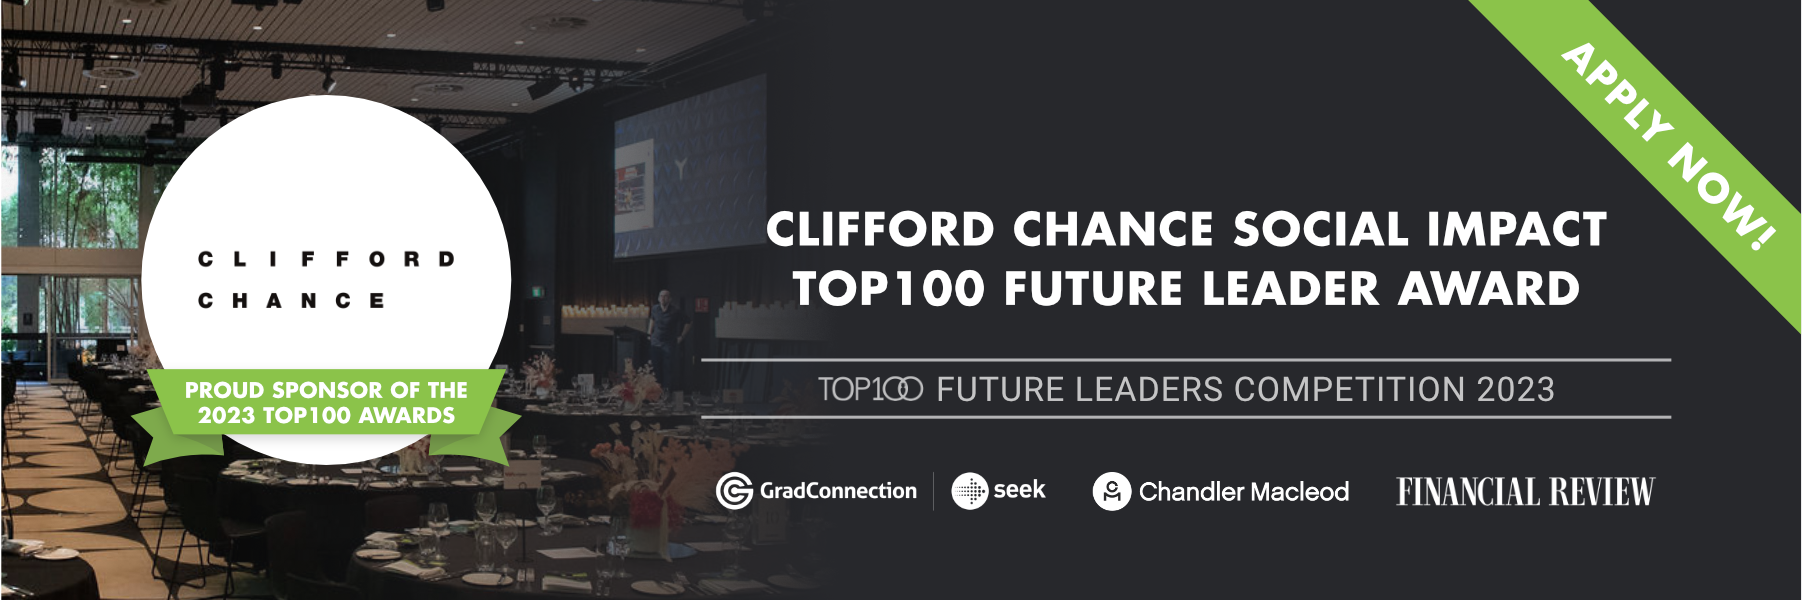 clifford chance top100